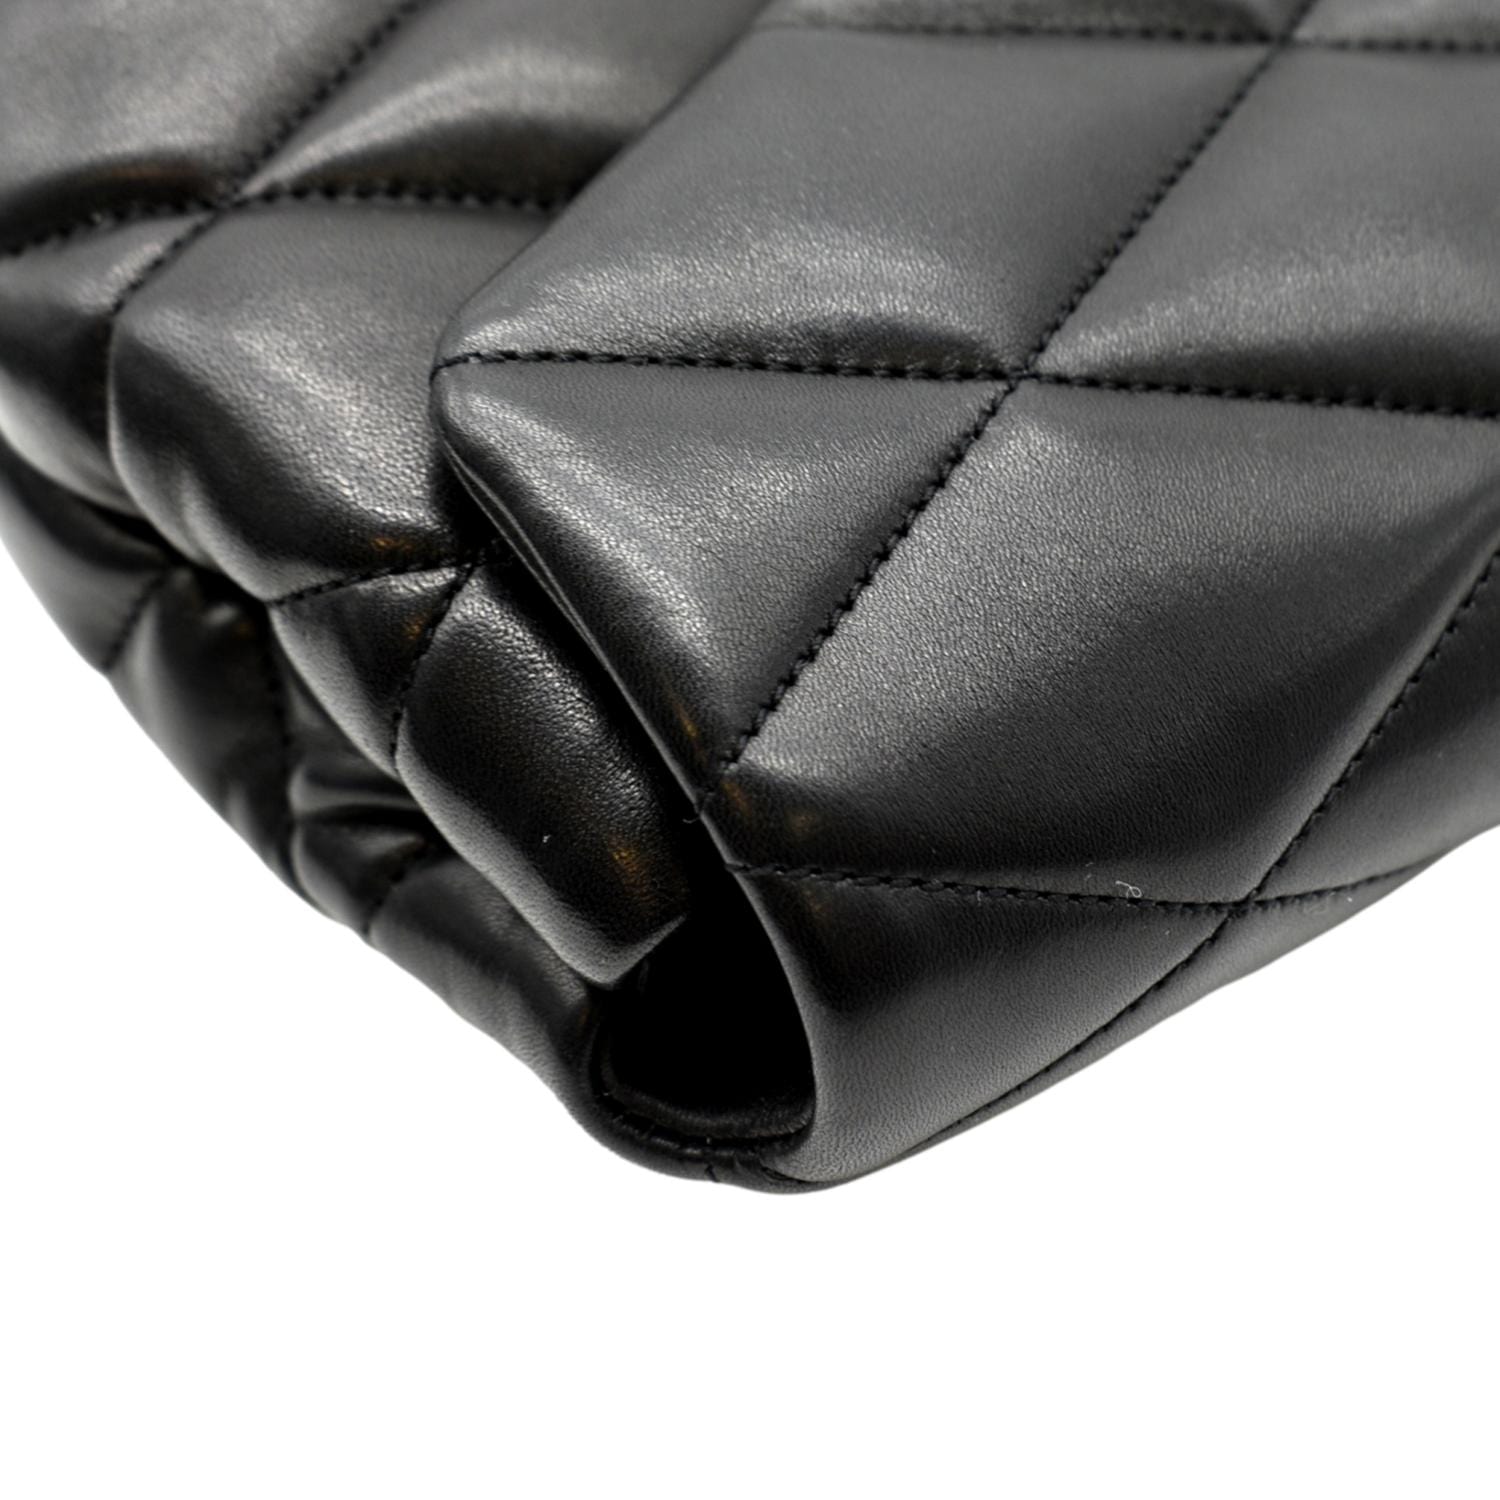 Quilted black leather clutch bag